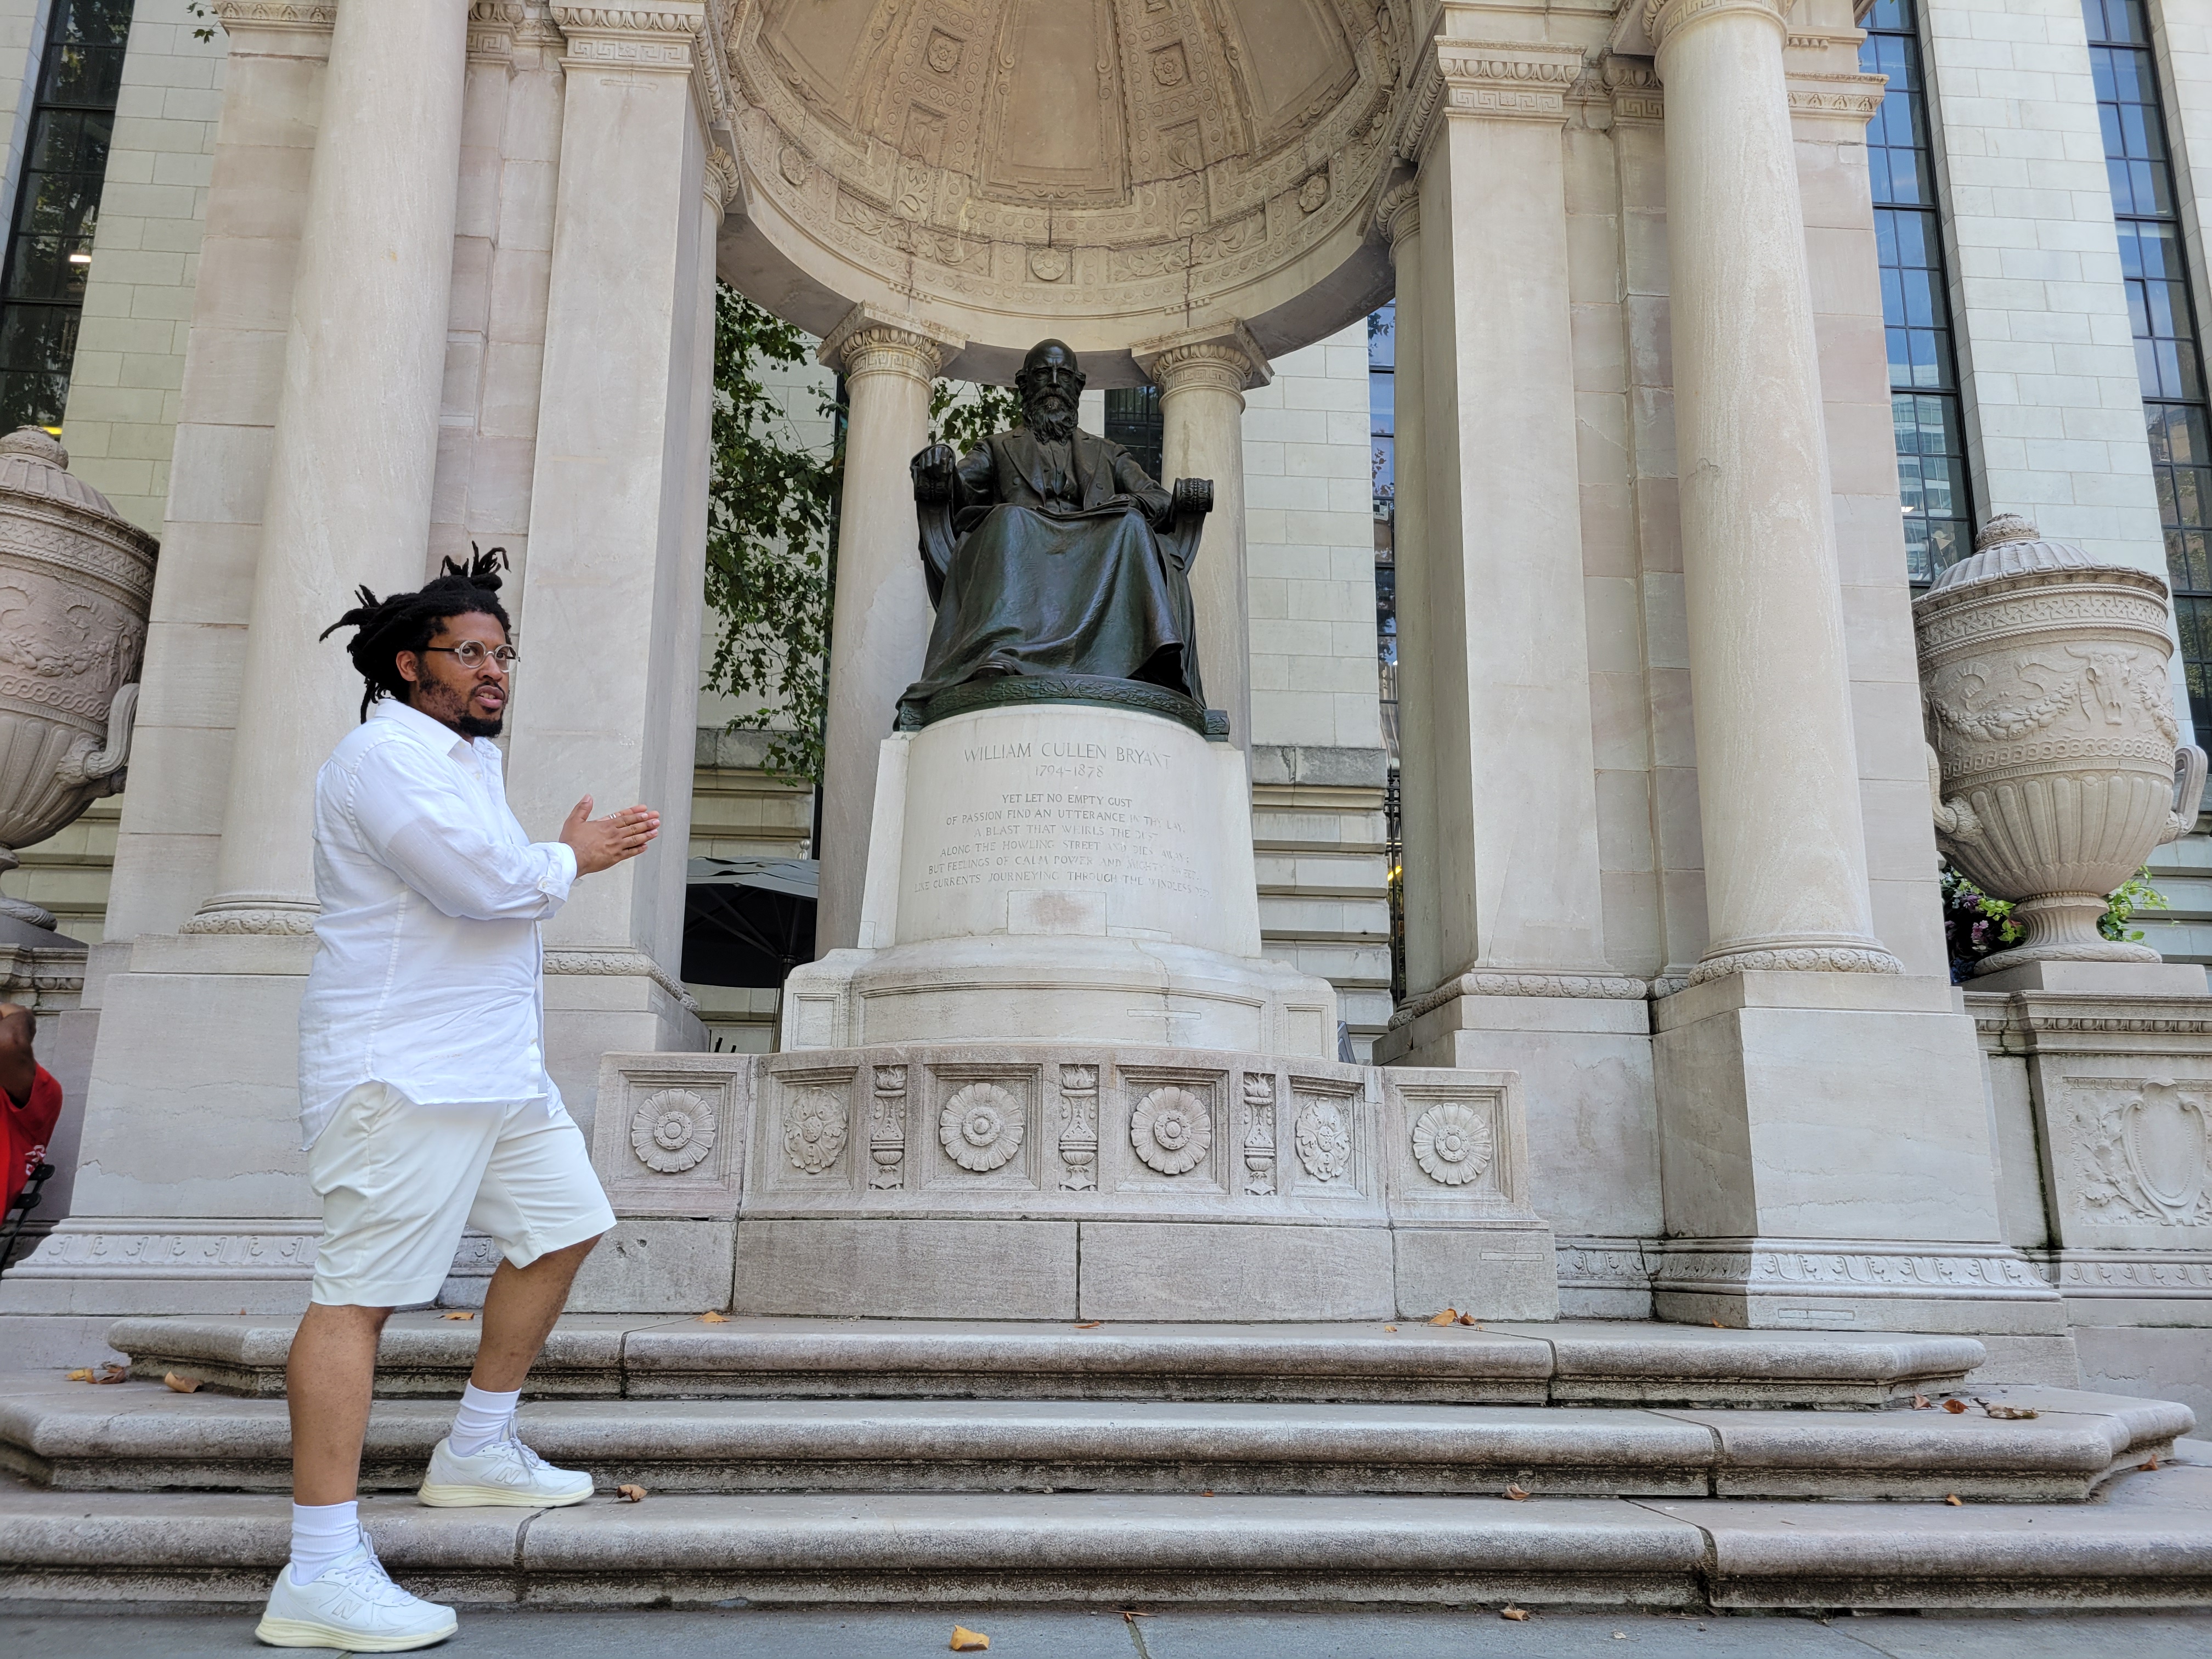 Kamau Ware, founder of the Black Gotham Experience, in front of the William Cullen Bryant statue in Bryant Park.